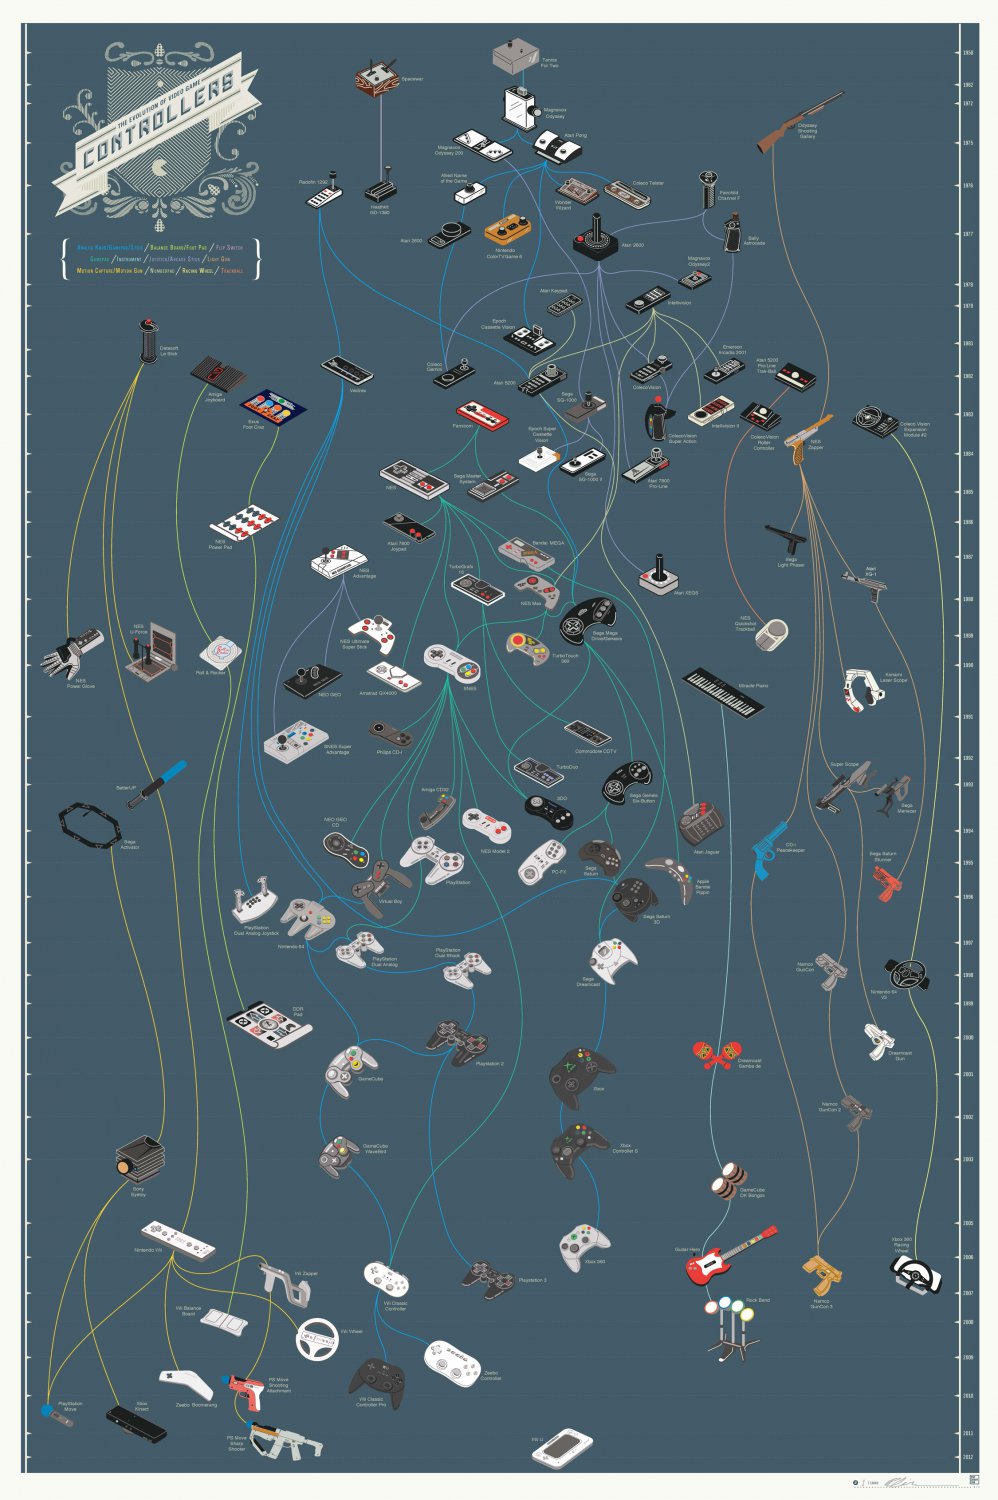 The Evolution of Video Game Controllers Chart 13"x19" (32cm/49cm) Polyester Fabric Poster